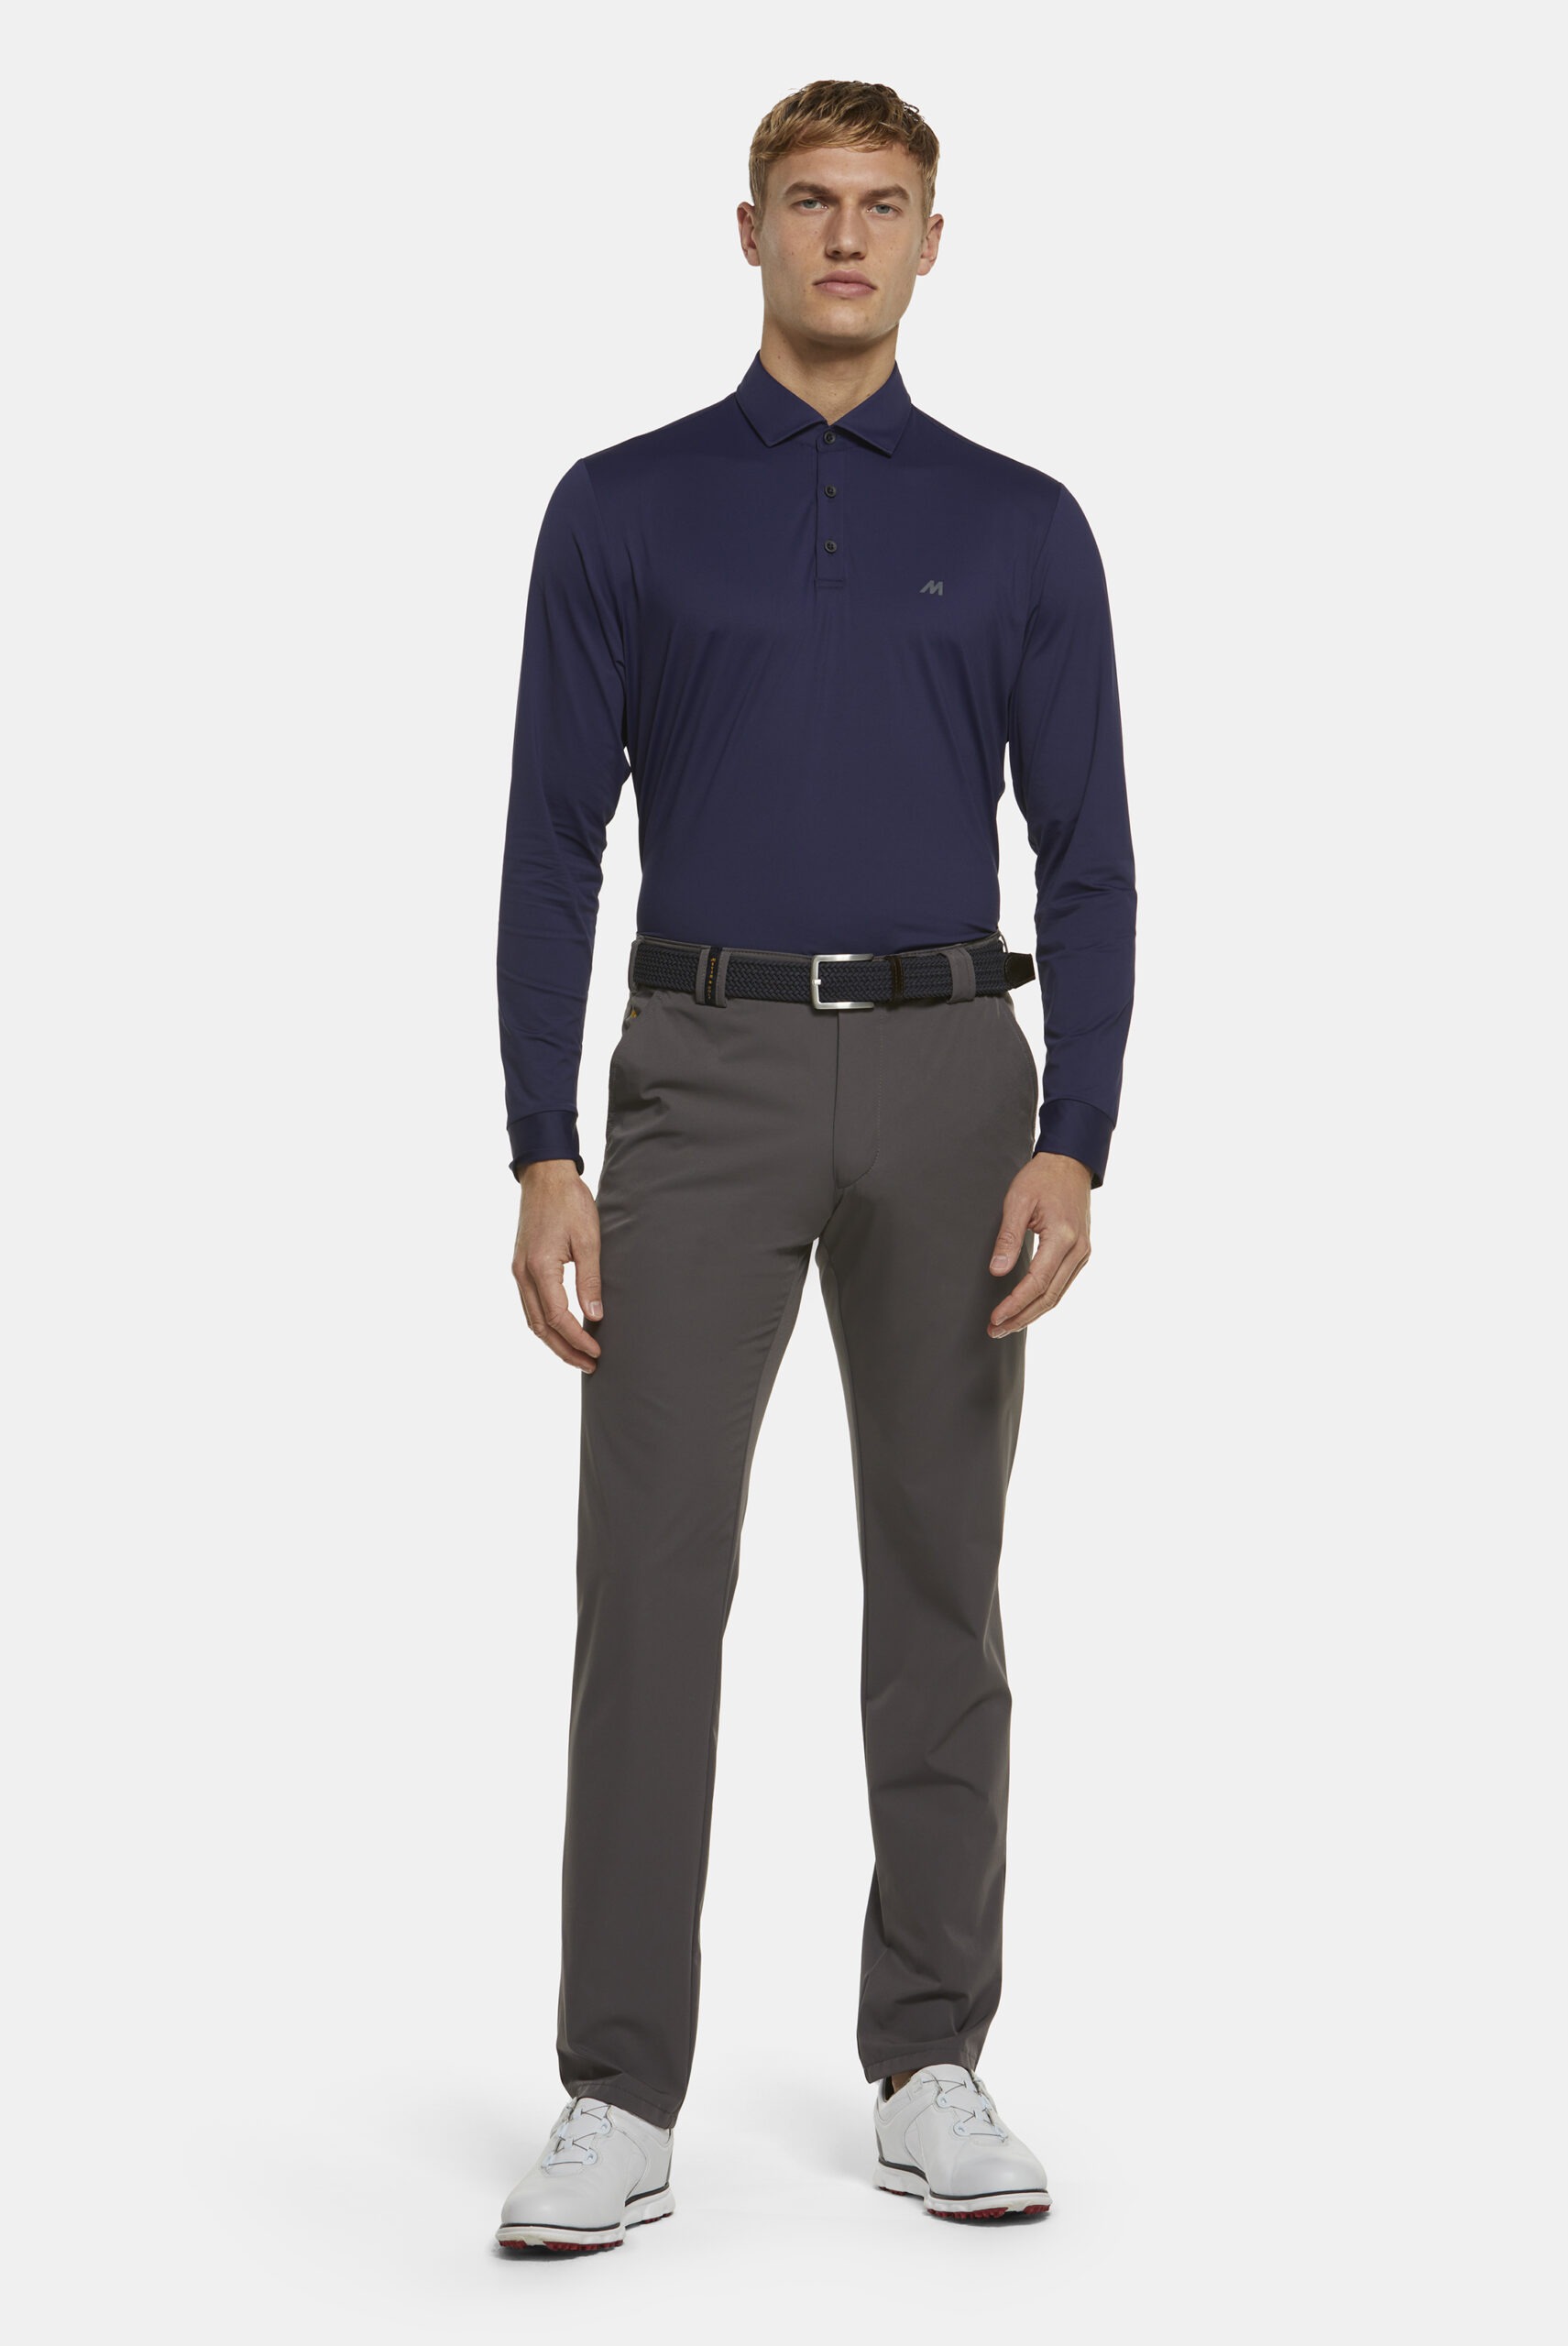 Golf Chino • High Performance (Augusta 8070) - First For Men